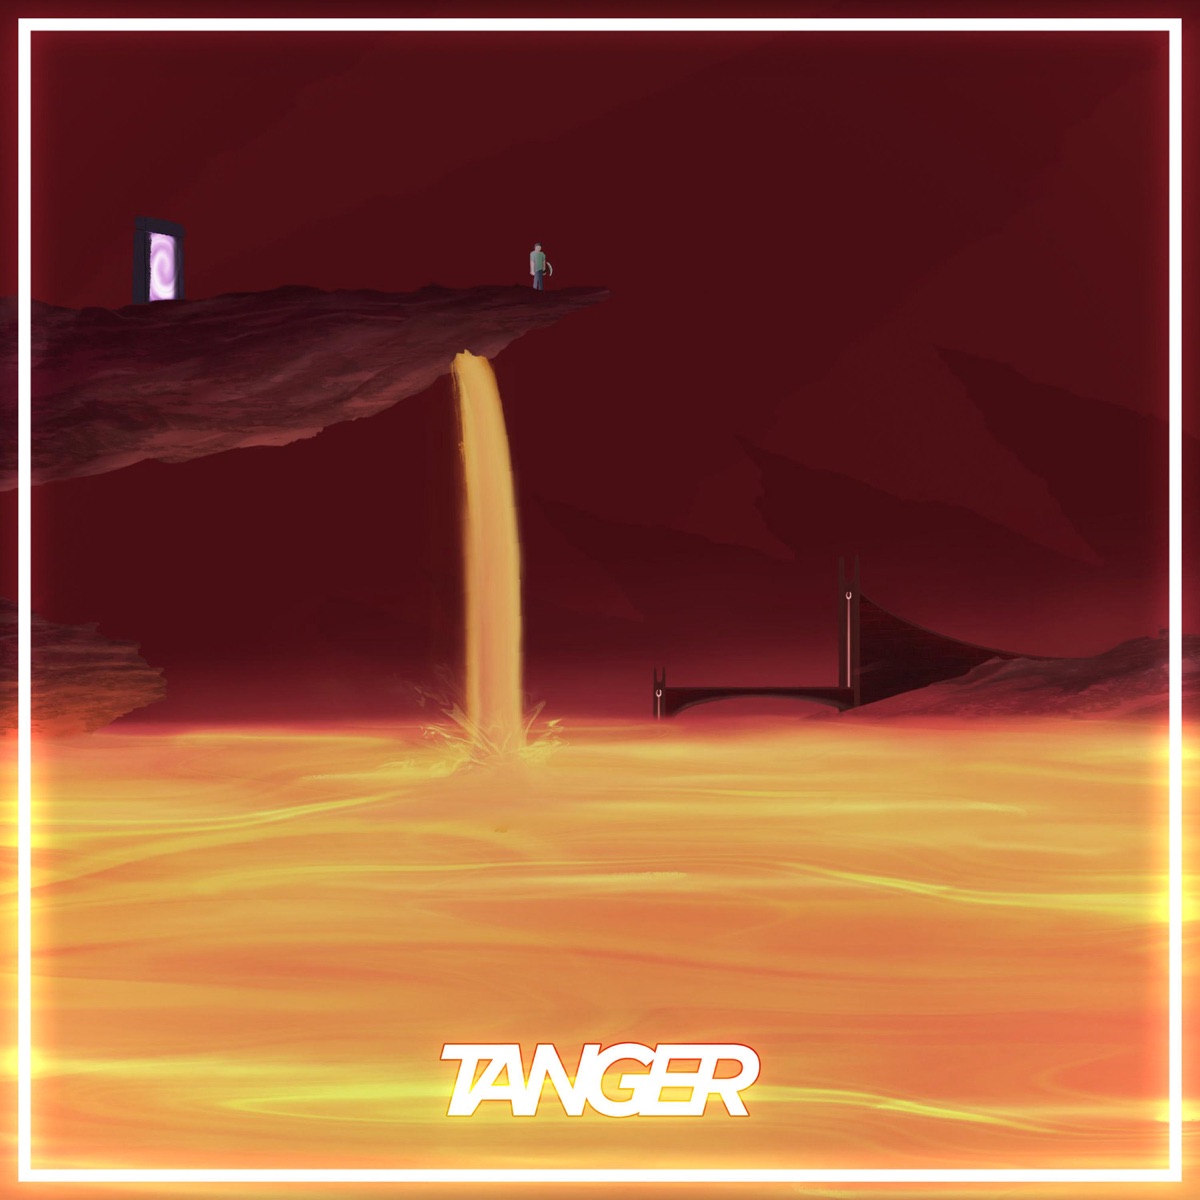 Stream [Full Flavor] Tanger - SUSSY BAKA feat. Schwank, Lil Triangle, and  Tanger by Tanger